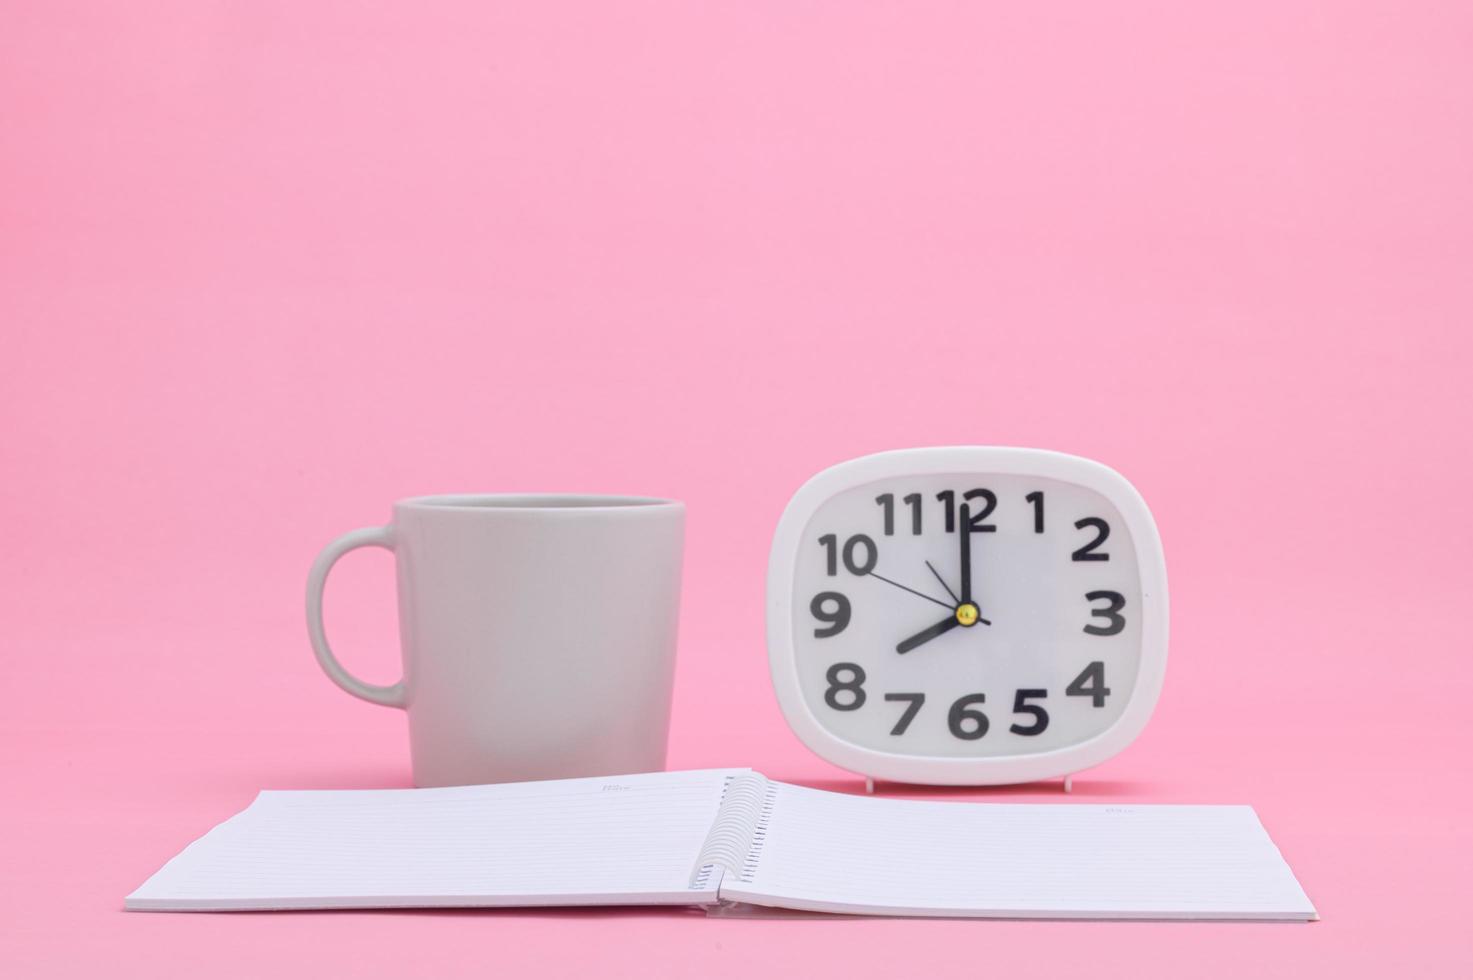 Notepad and cup on pink background photo